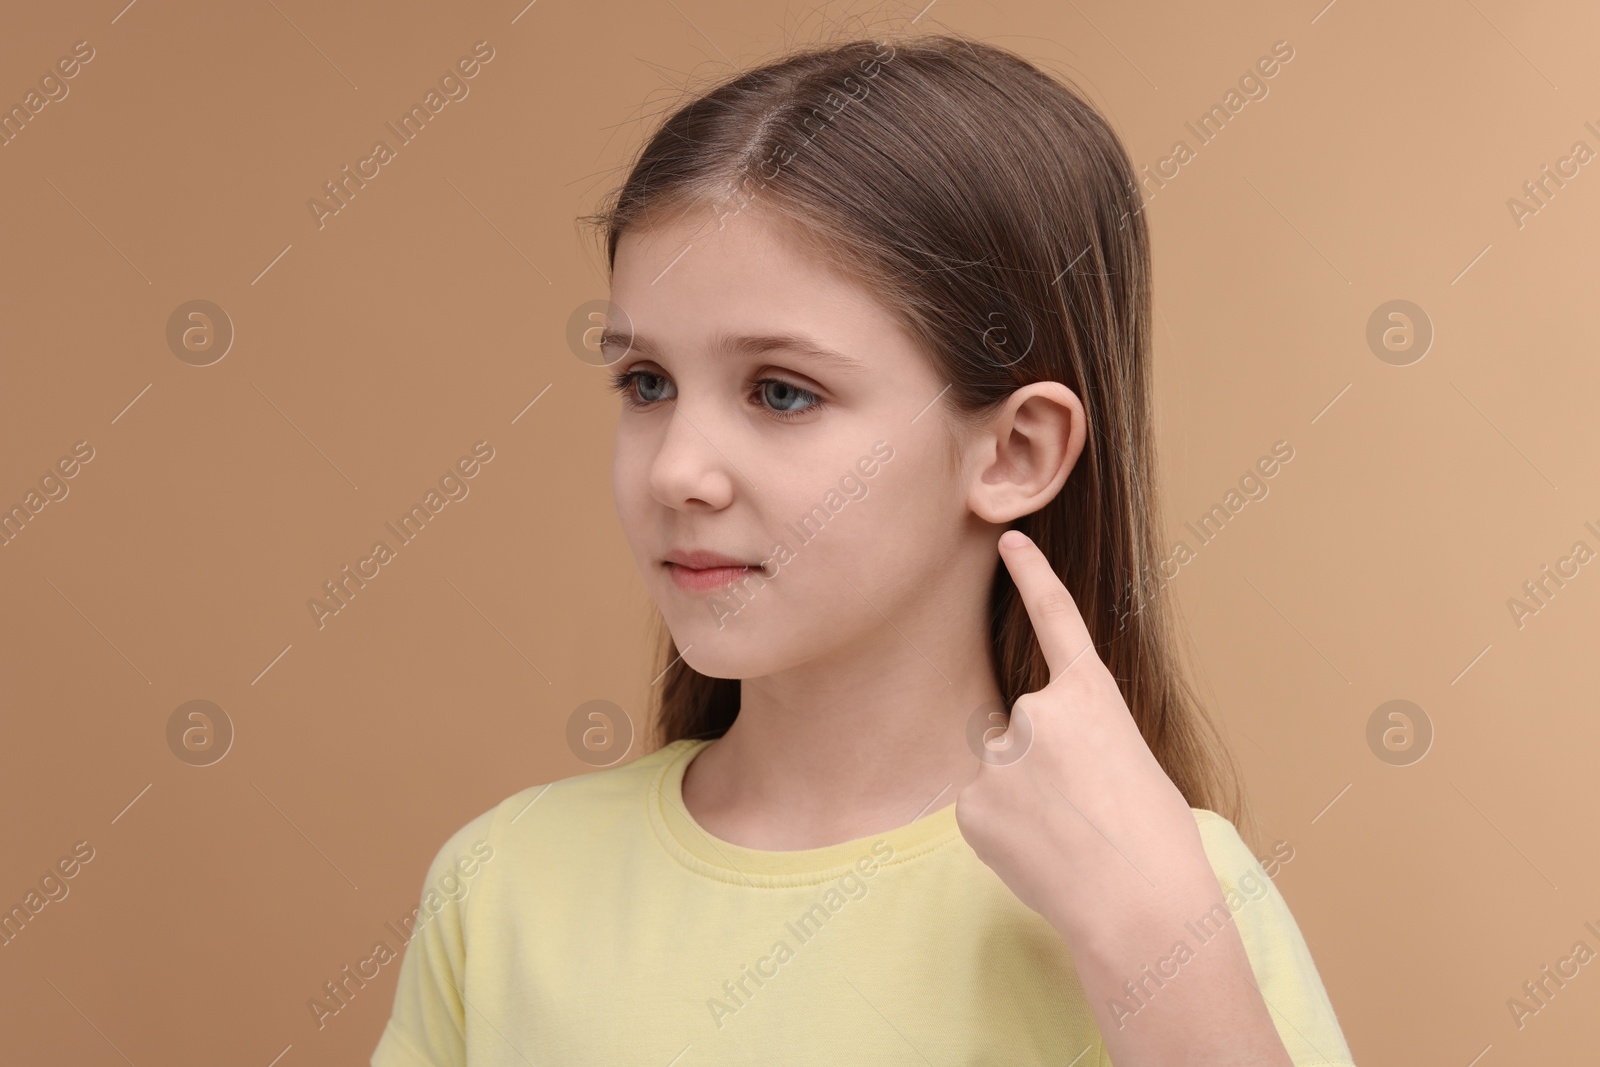 Photo of Hearing problem. Little girl pointing at ear on pale brown background